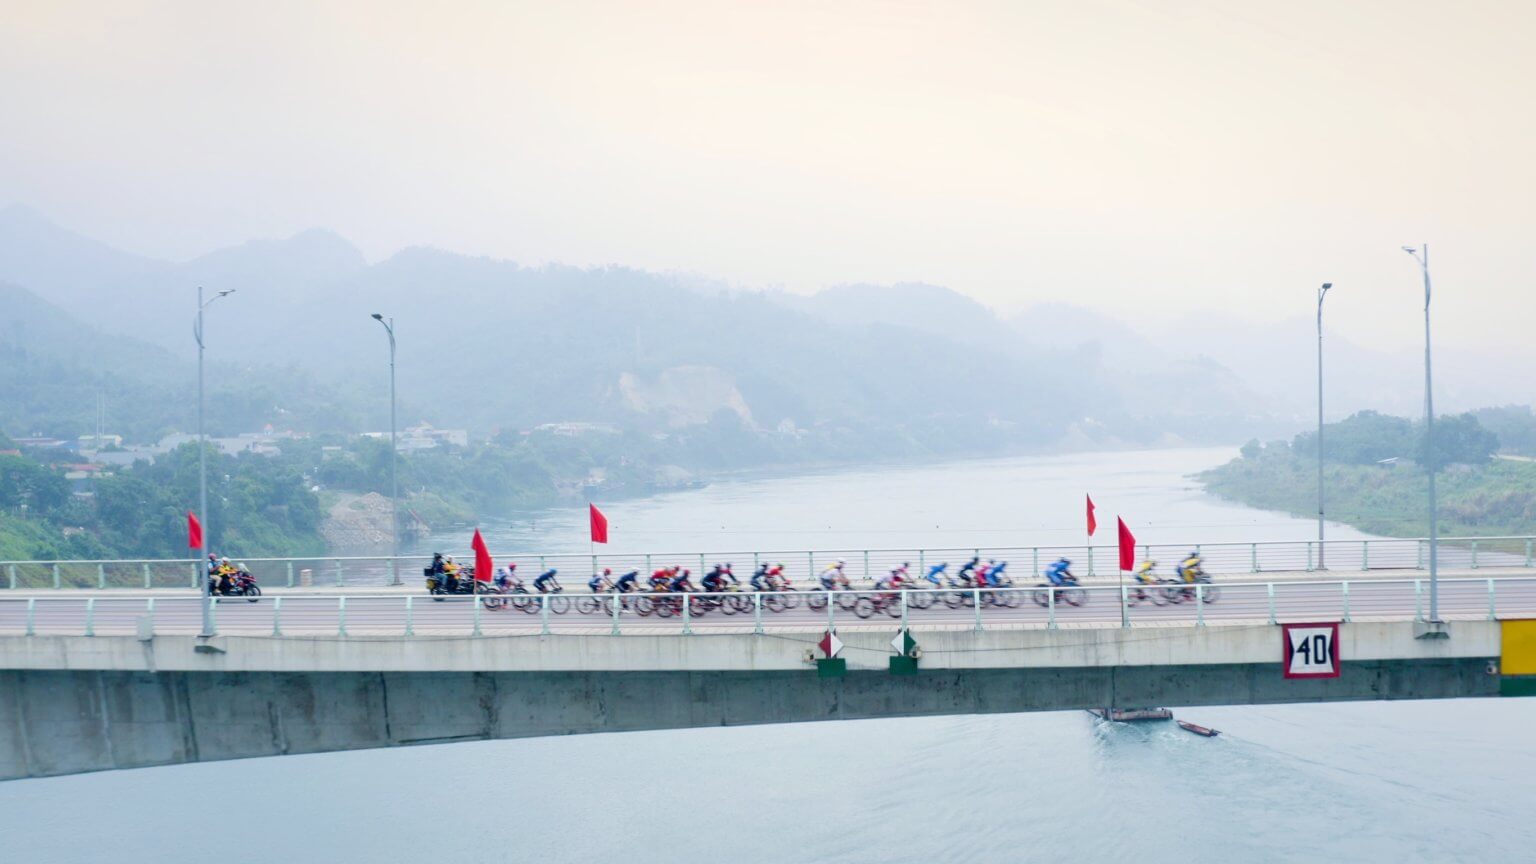 Aerial image showing a bridge running across the frame. The bridge is above a wide river and soft blue mountains are in the distance. On the bridge is a peloton of cyclists riding from left to right across the bridge.